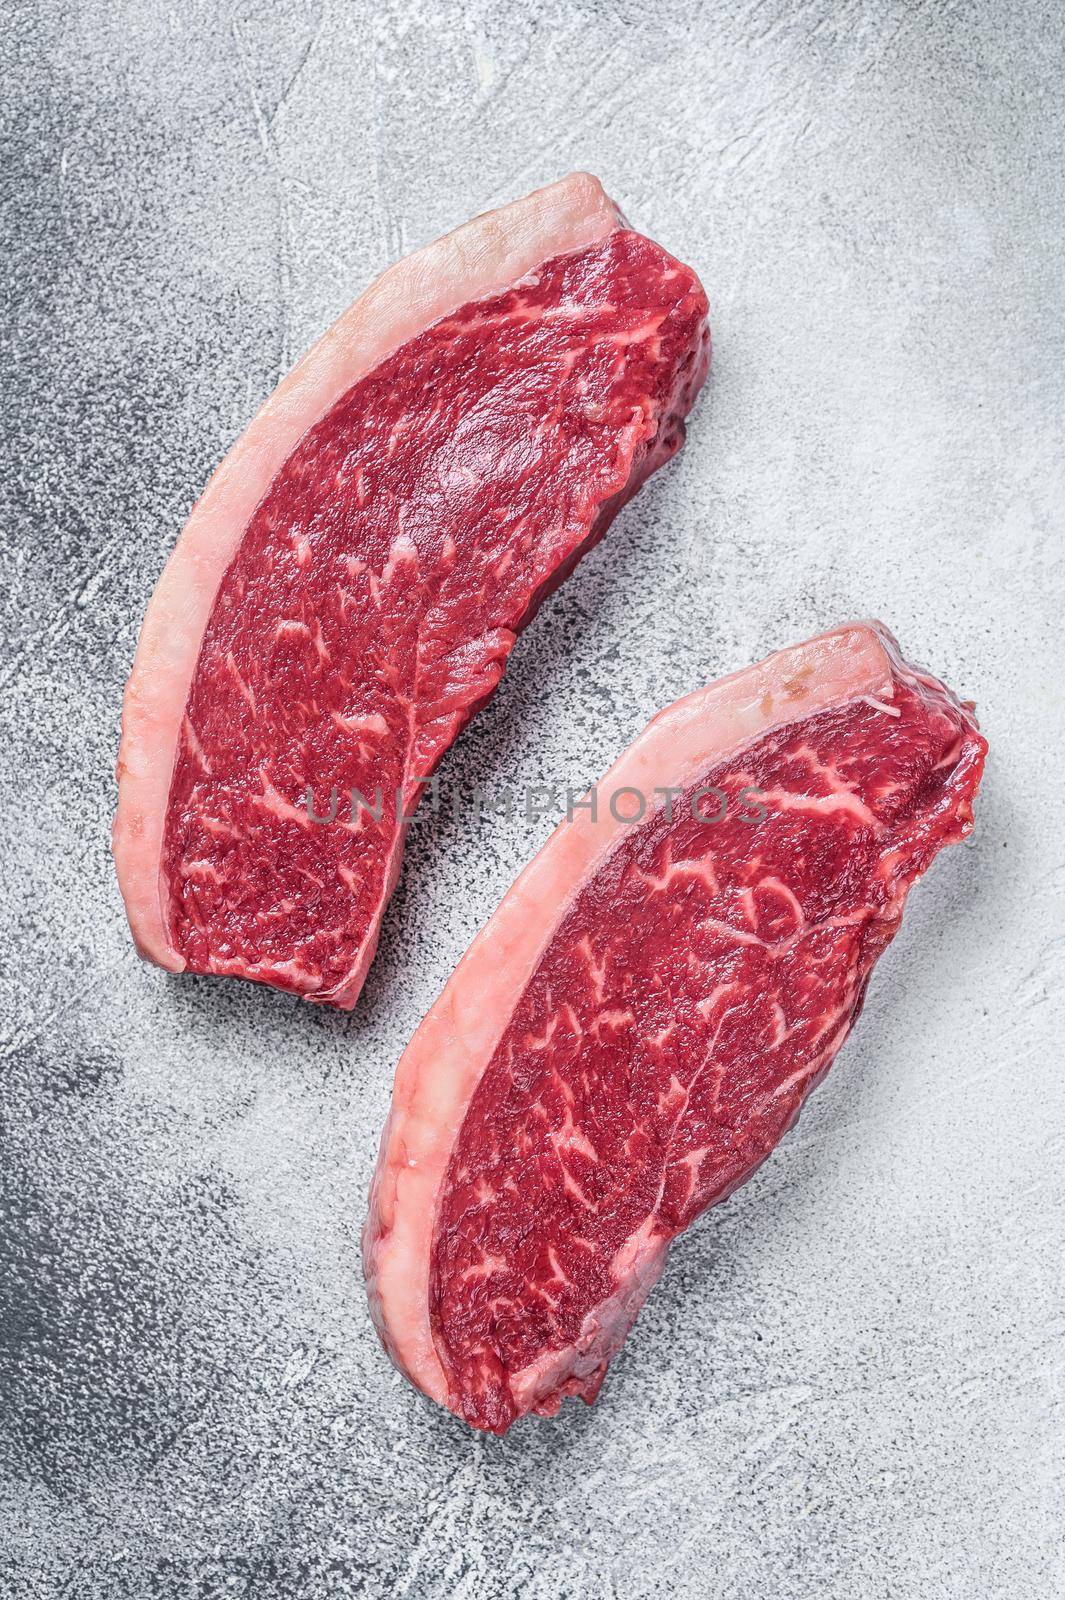 Raw cap rump or top sirloin beef meat steak. White background. Top view by Composter